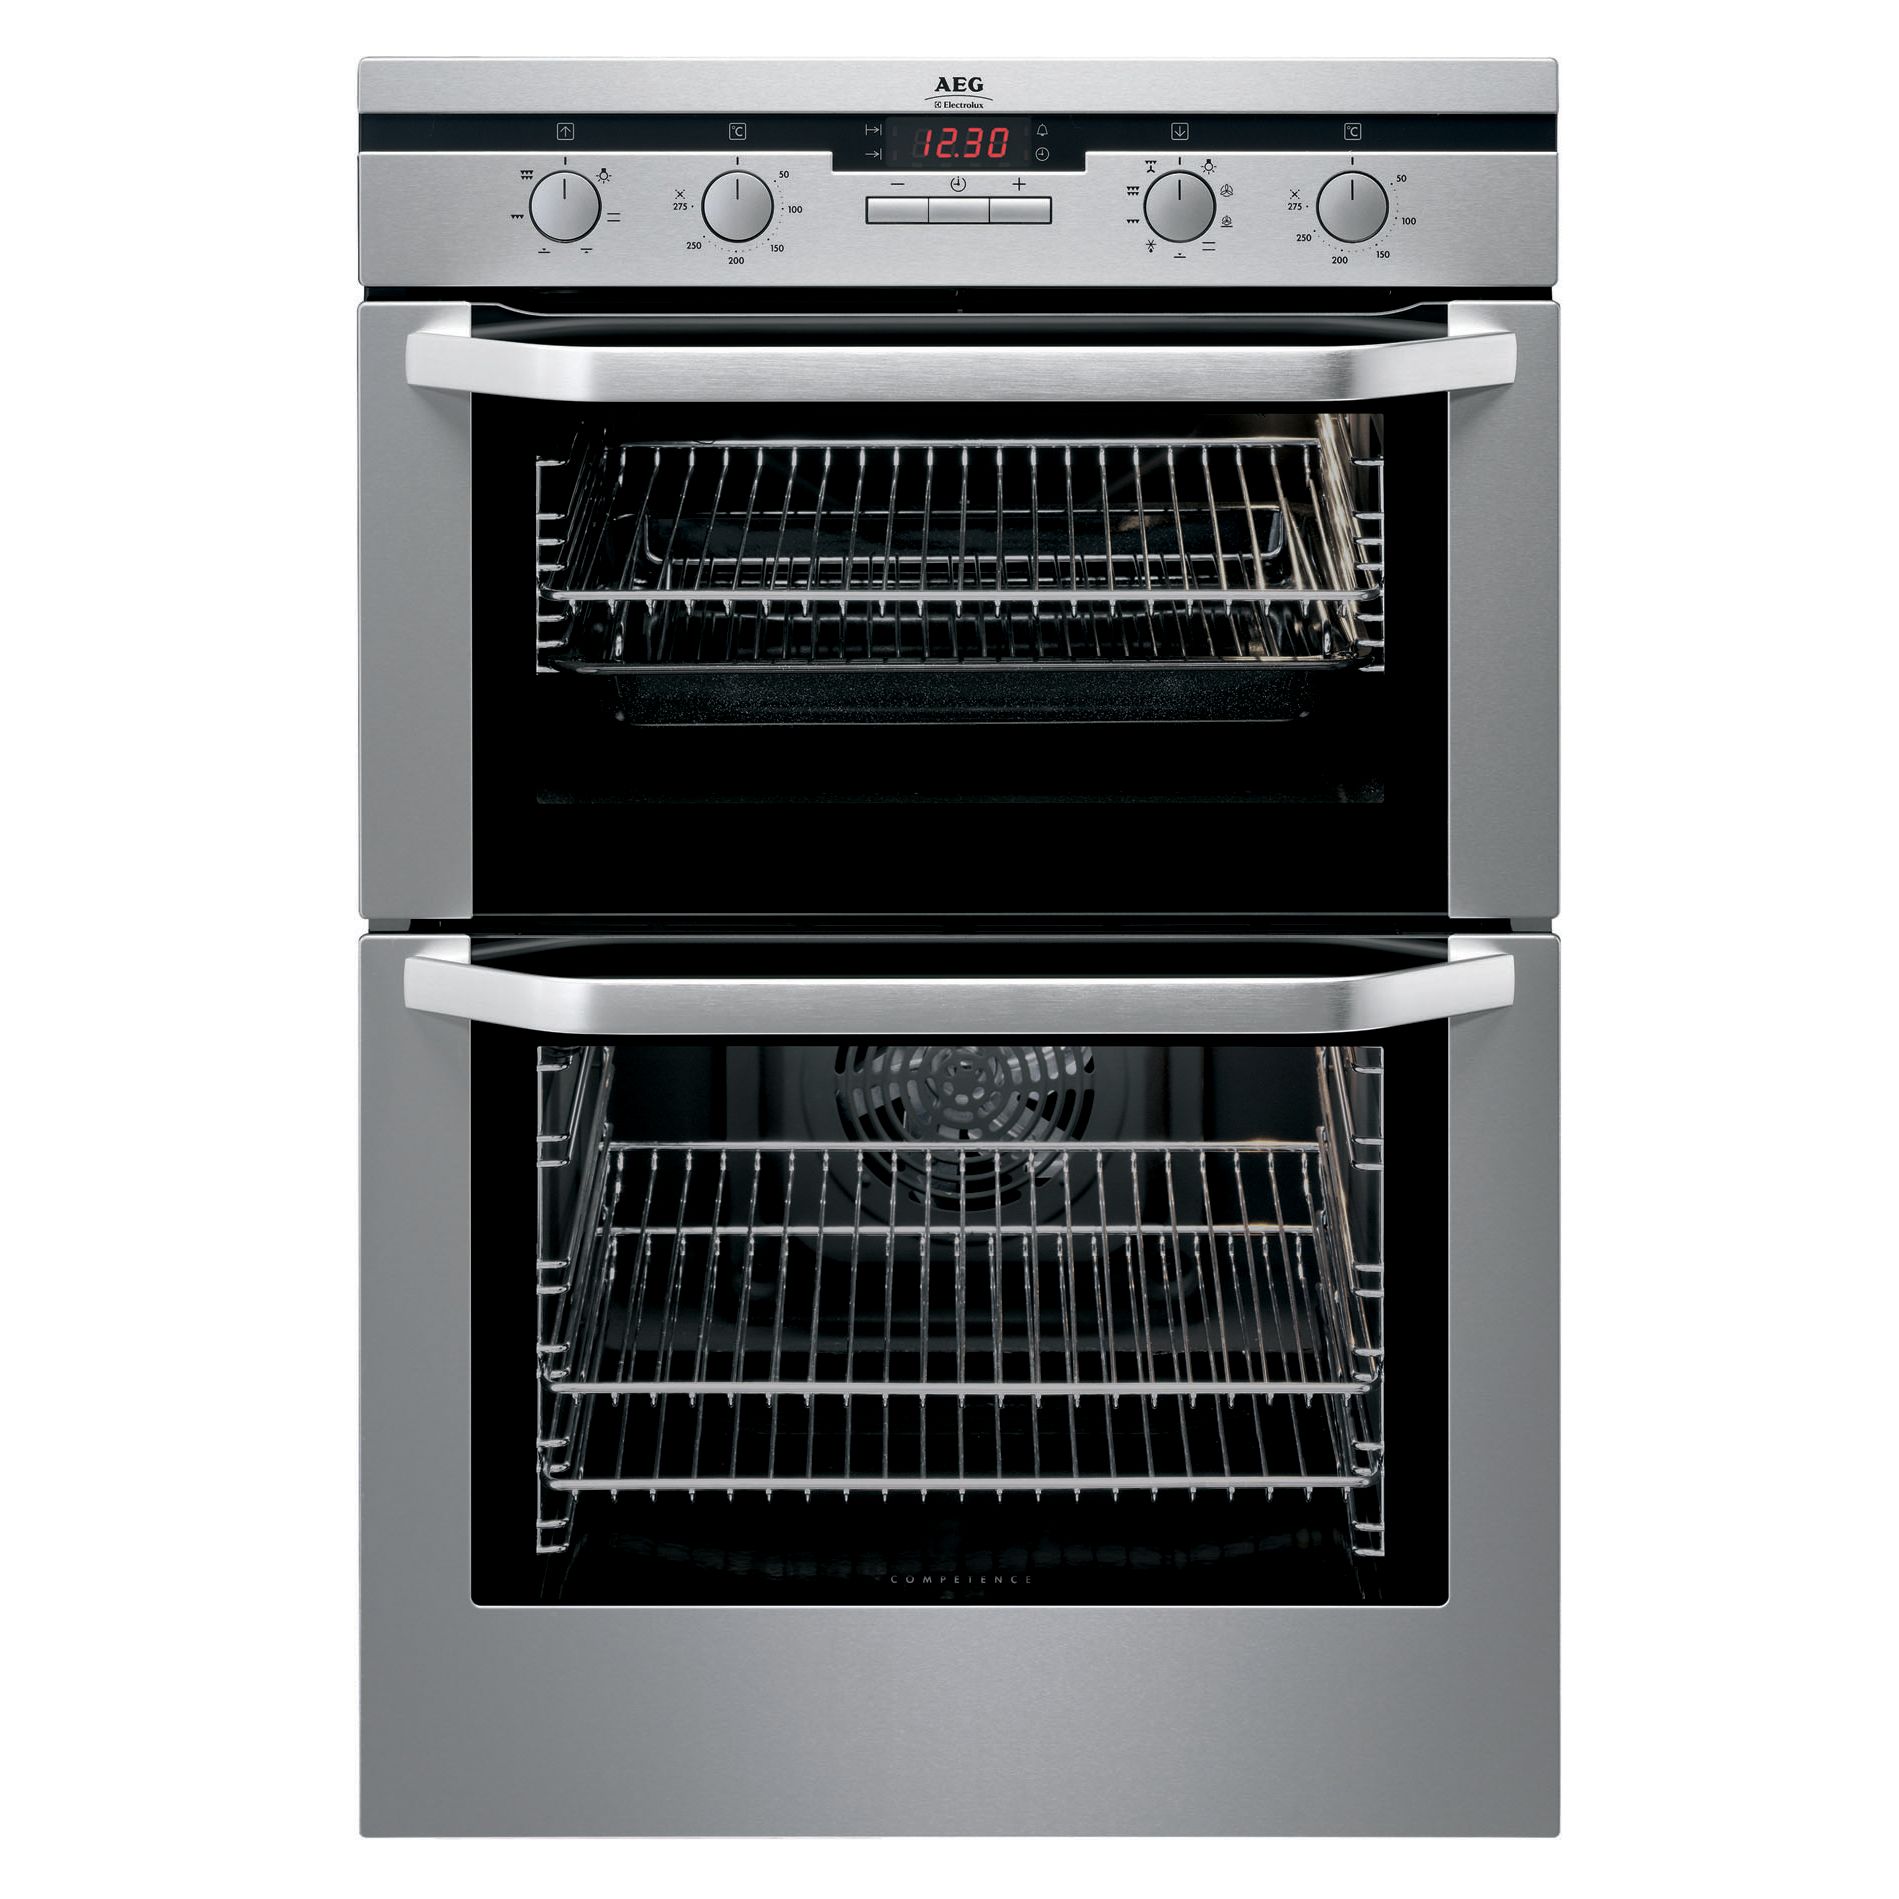 AEG D41116M Double Electric Oven, Stainless Steel at John Lewis